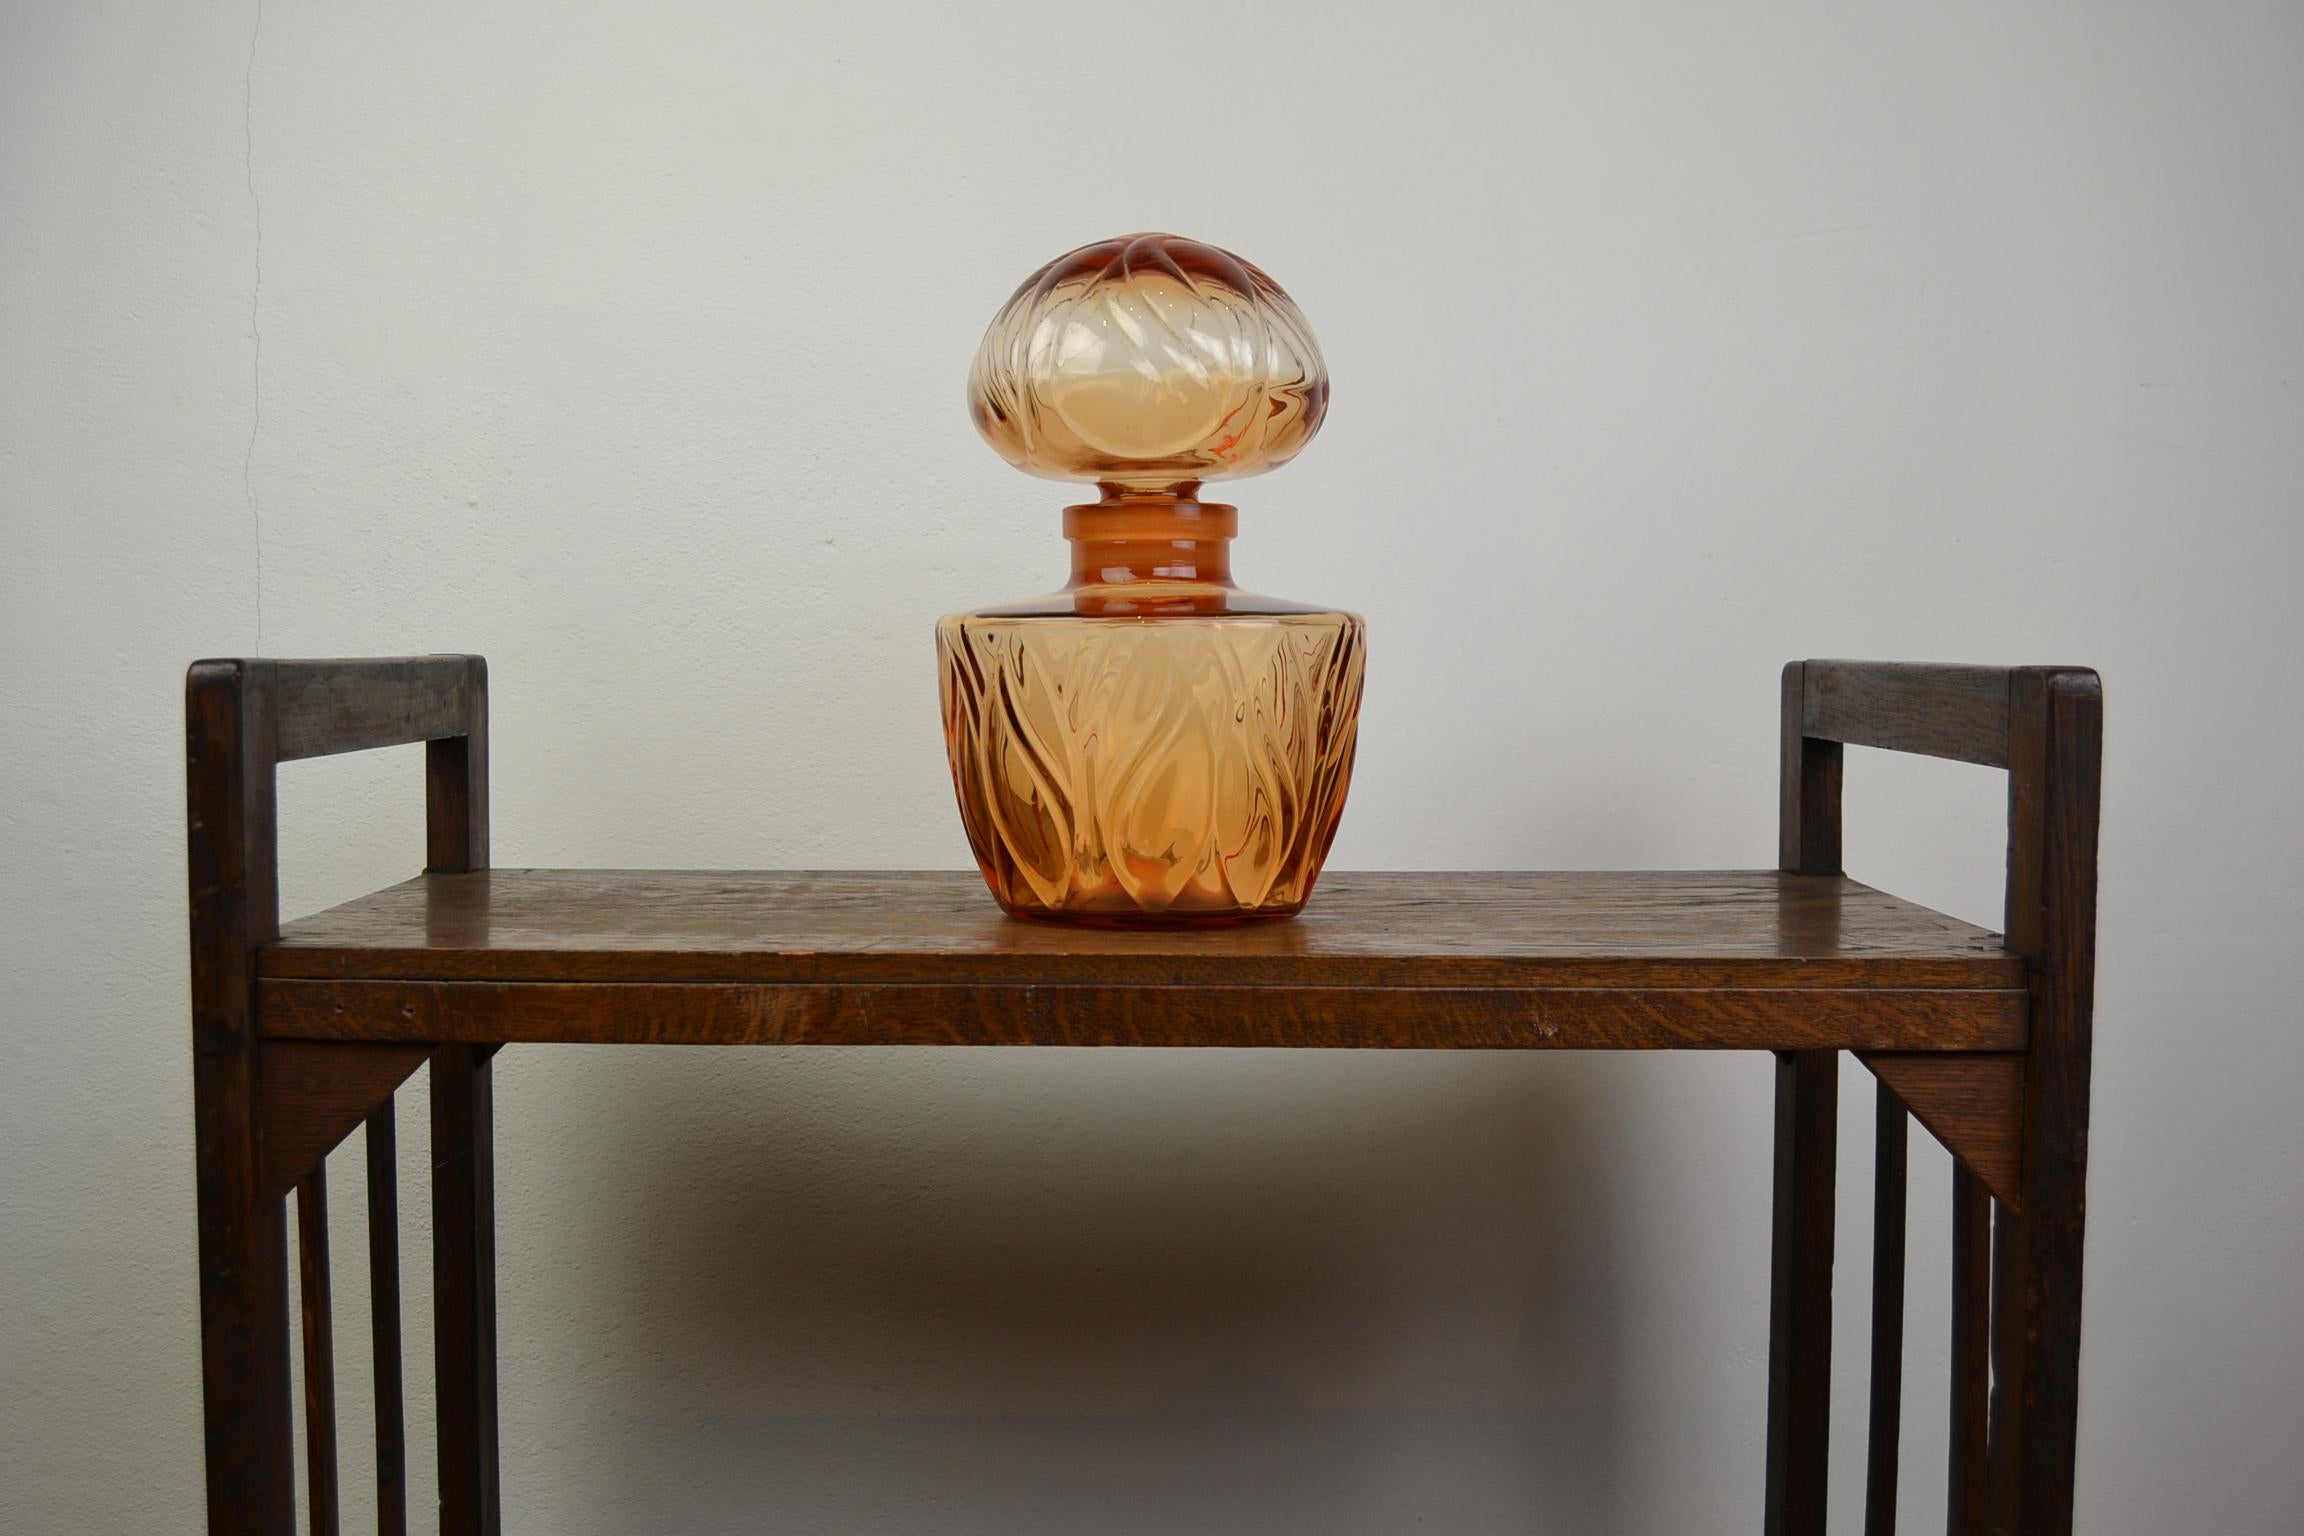 Stylish large Faberge Perfume Display Bottle for shop .
This amber glass bottle is marked Faberge - Paris - France.
It has a great design and shape :
The bottom of the bottle being the plant and the stopper beeing a bloom.
The bottle is made of